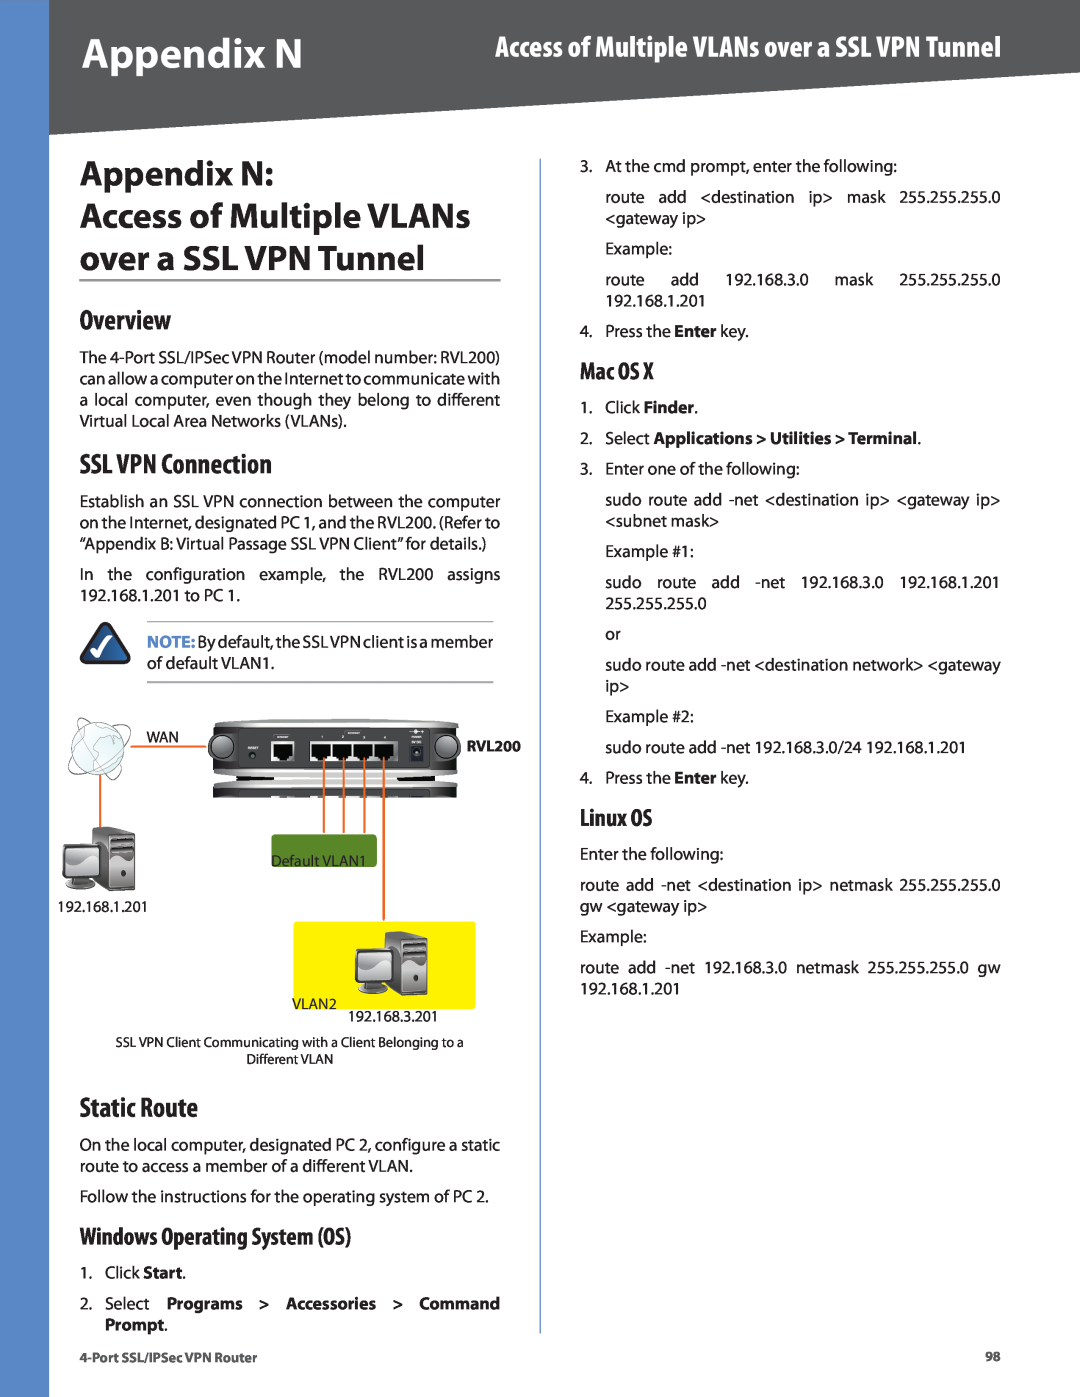 Cisco Systems RVL200 Appendix N, Access of Multiple VLANs, over a SSL VPN Tunnel, Static Route, Mac OS, SSL VPN Connection 